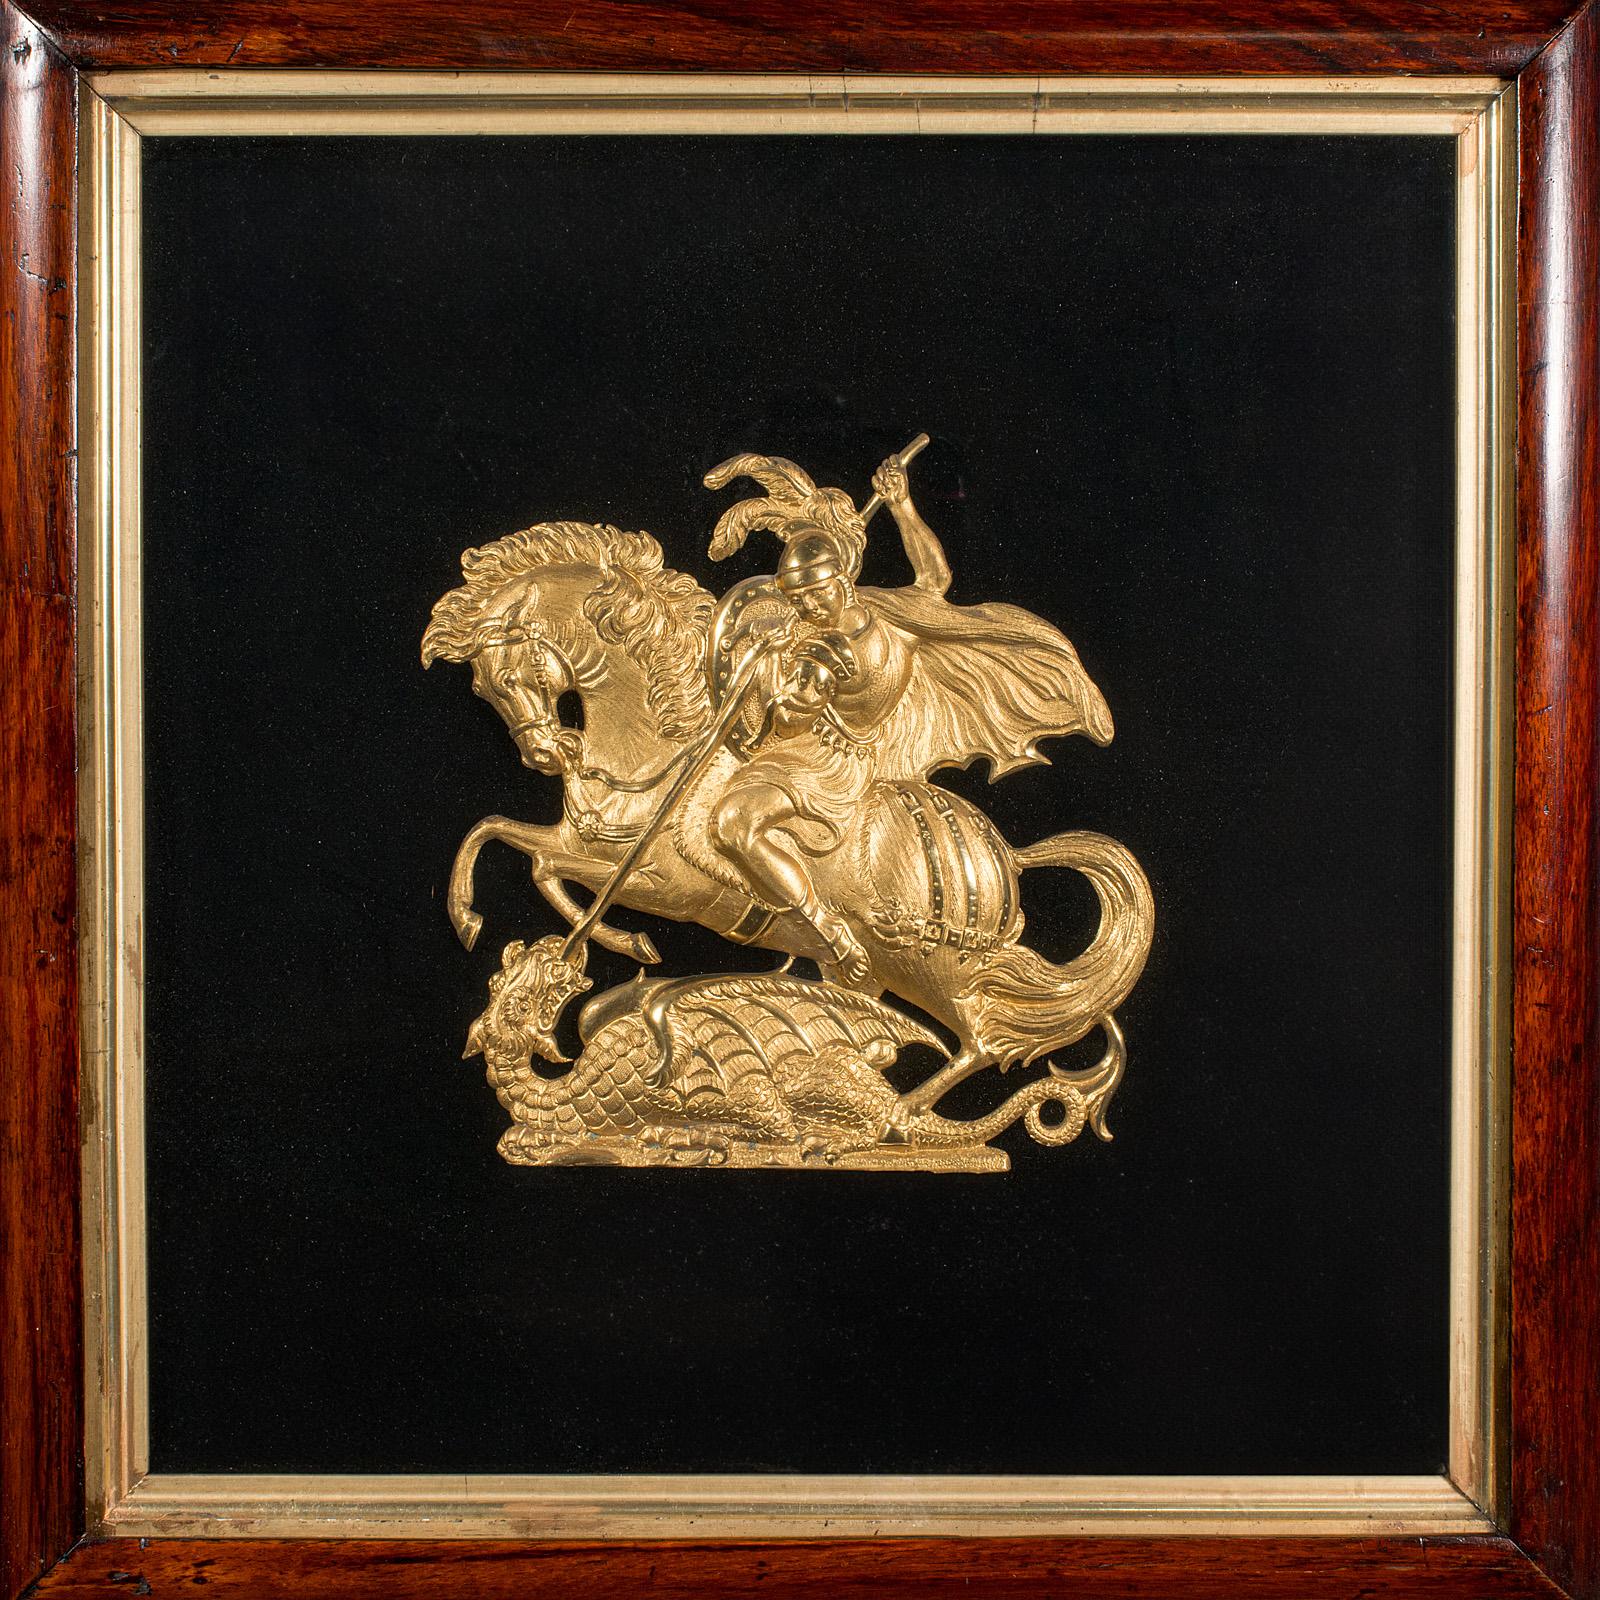 Antique George & The Dragon Display Plaque, English, Decorative Relief, Regency In Good Condition For Sale In Hele, Devon, GB